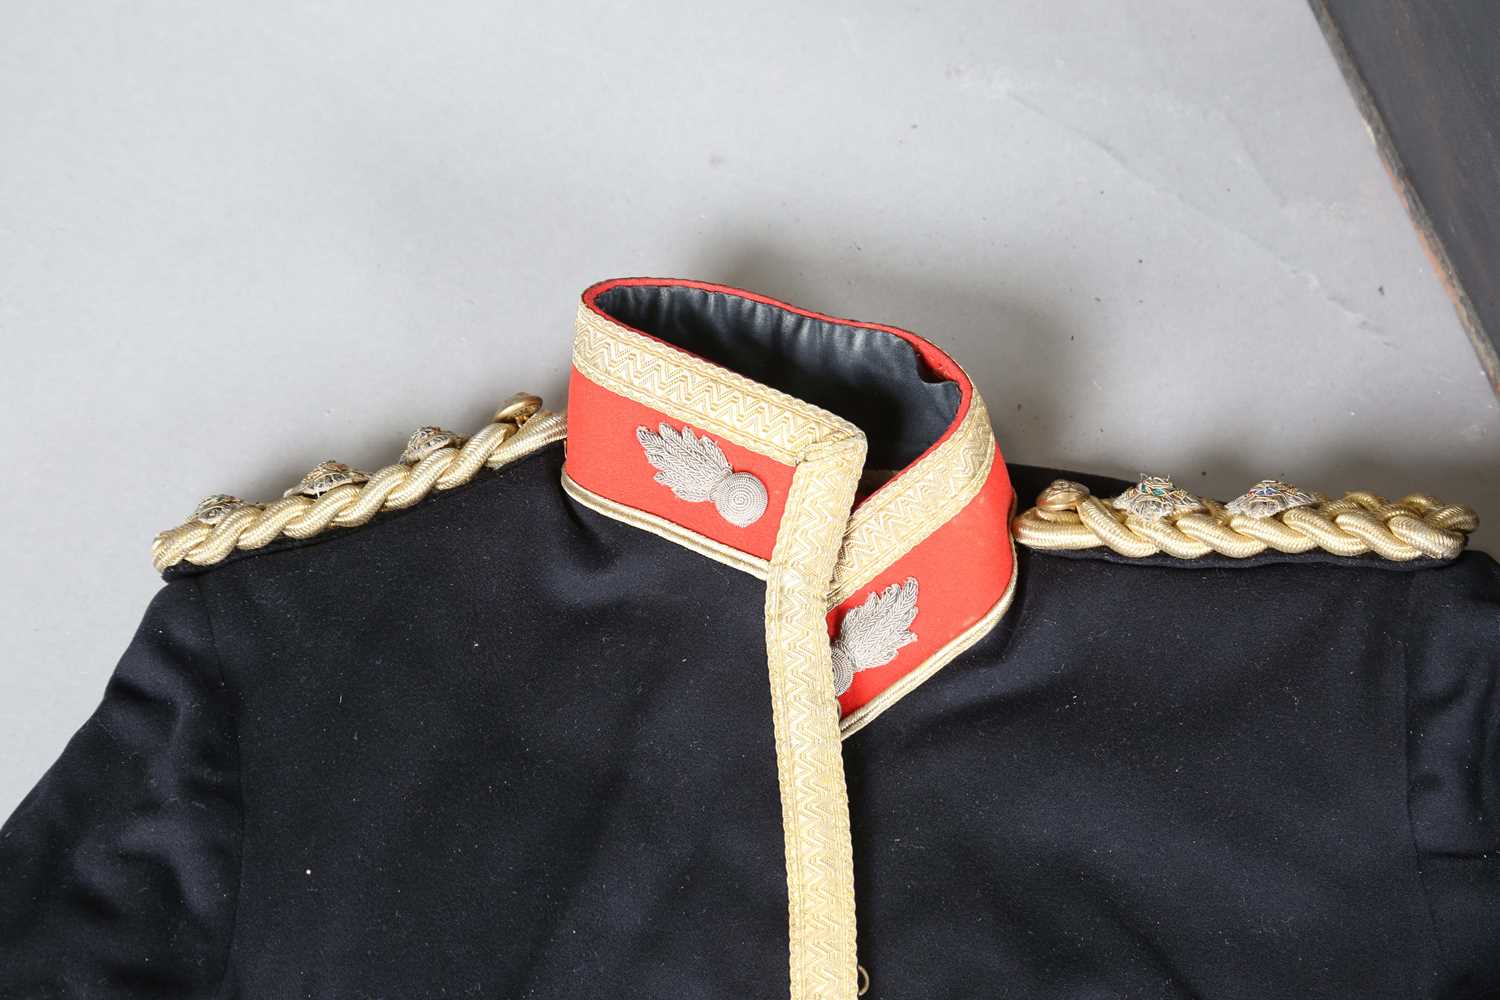 A late Victorian Royal Artillery officer's dress uniform, comprising two jackets, waistcoat, - Image 4 of 8